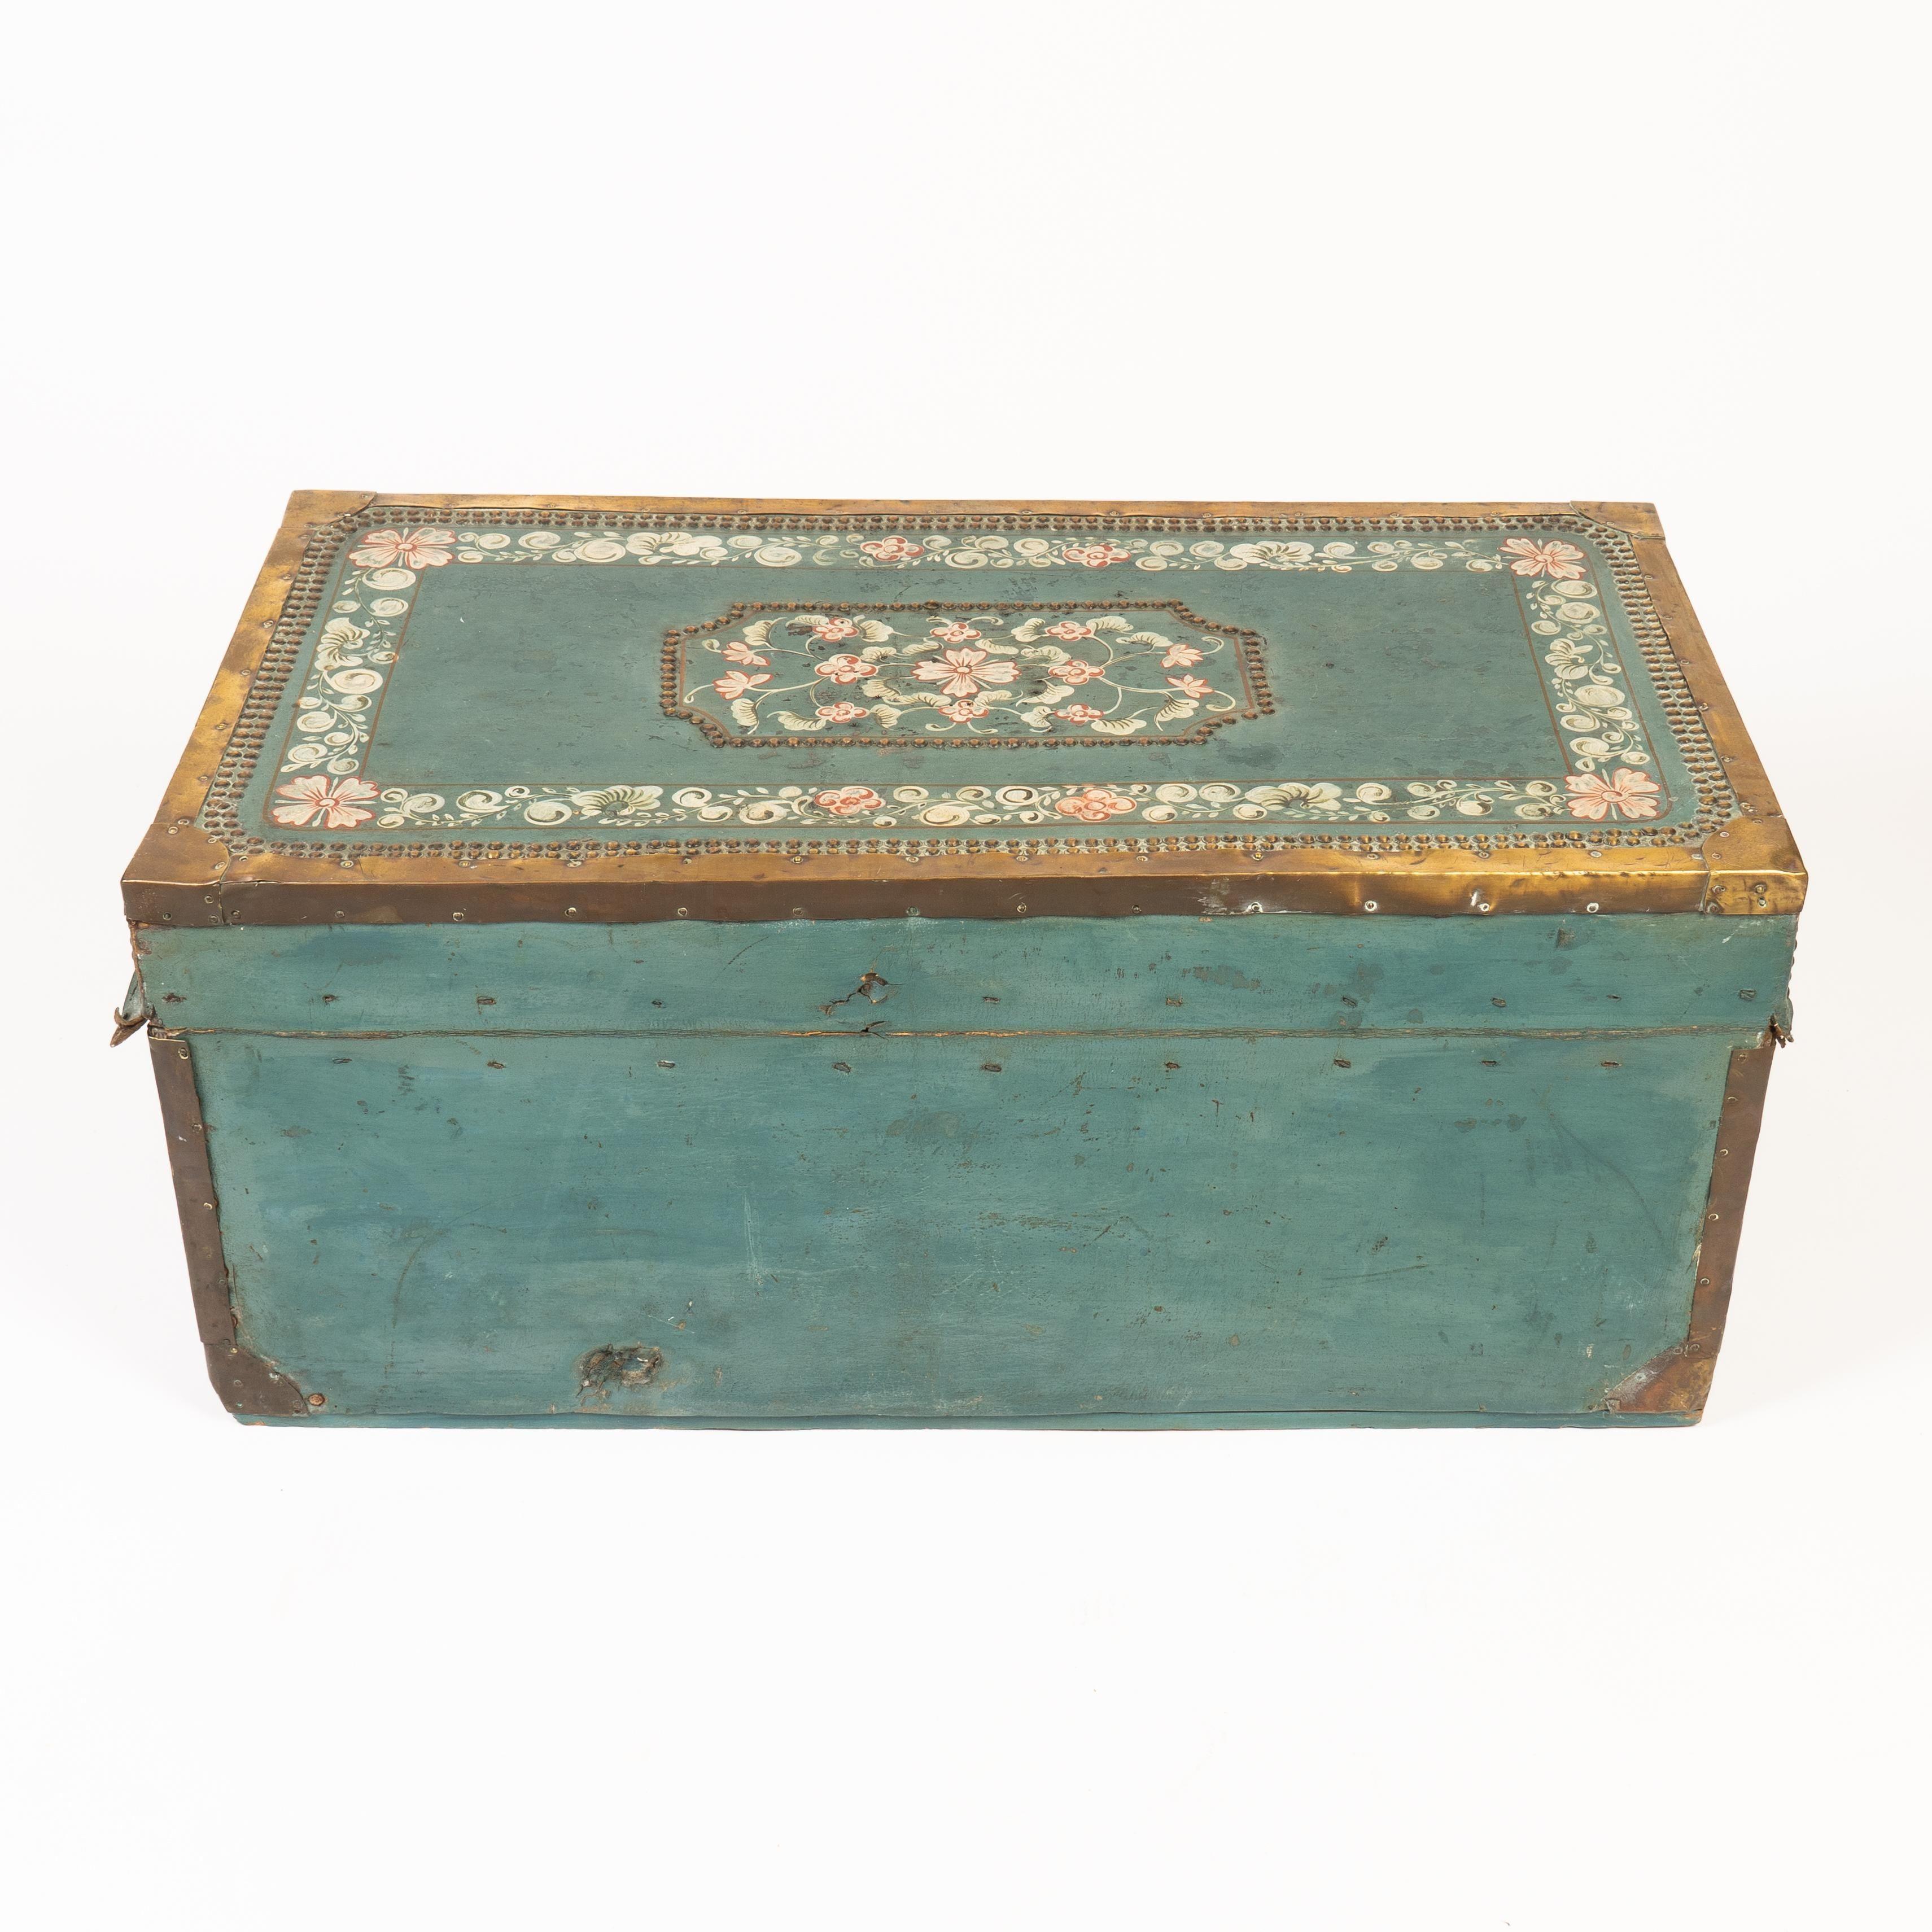 Early 19th Century Chinese Decorated Blue Leather Covered Wood Trunk For Sale 3